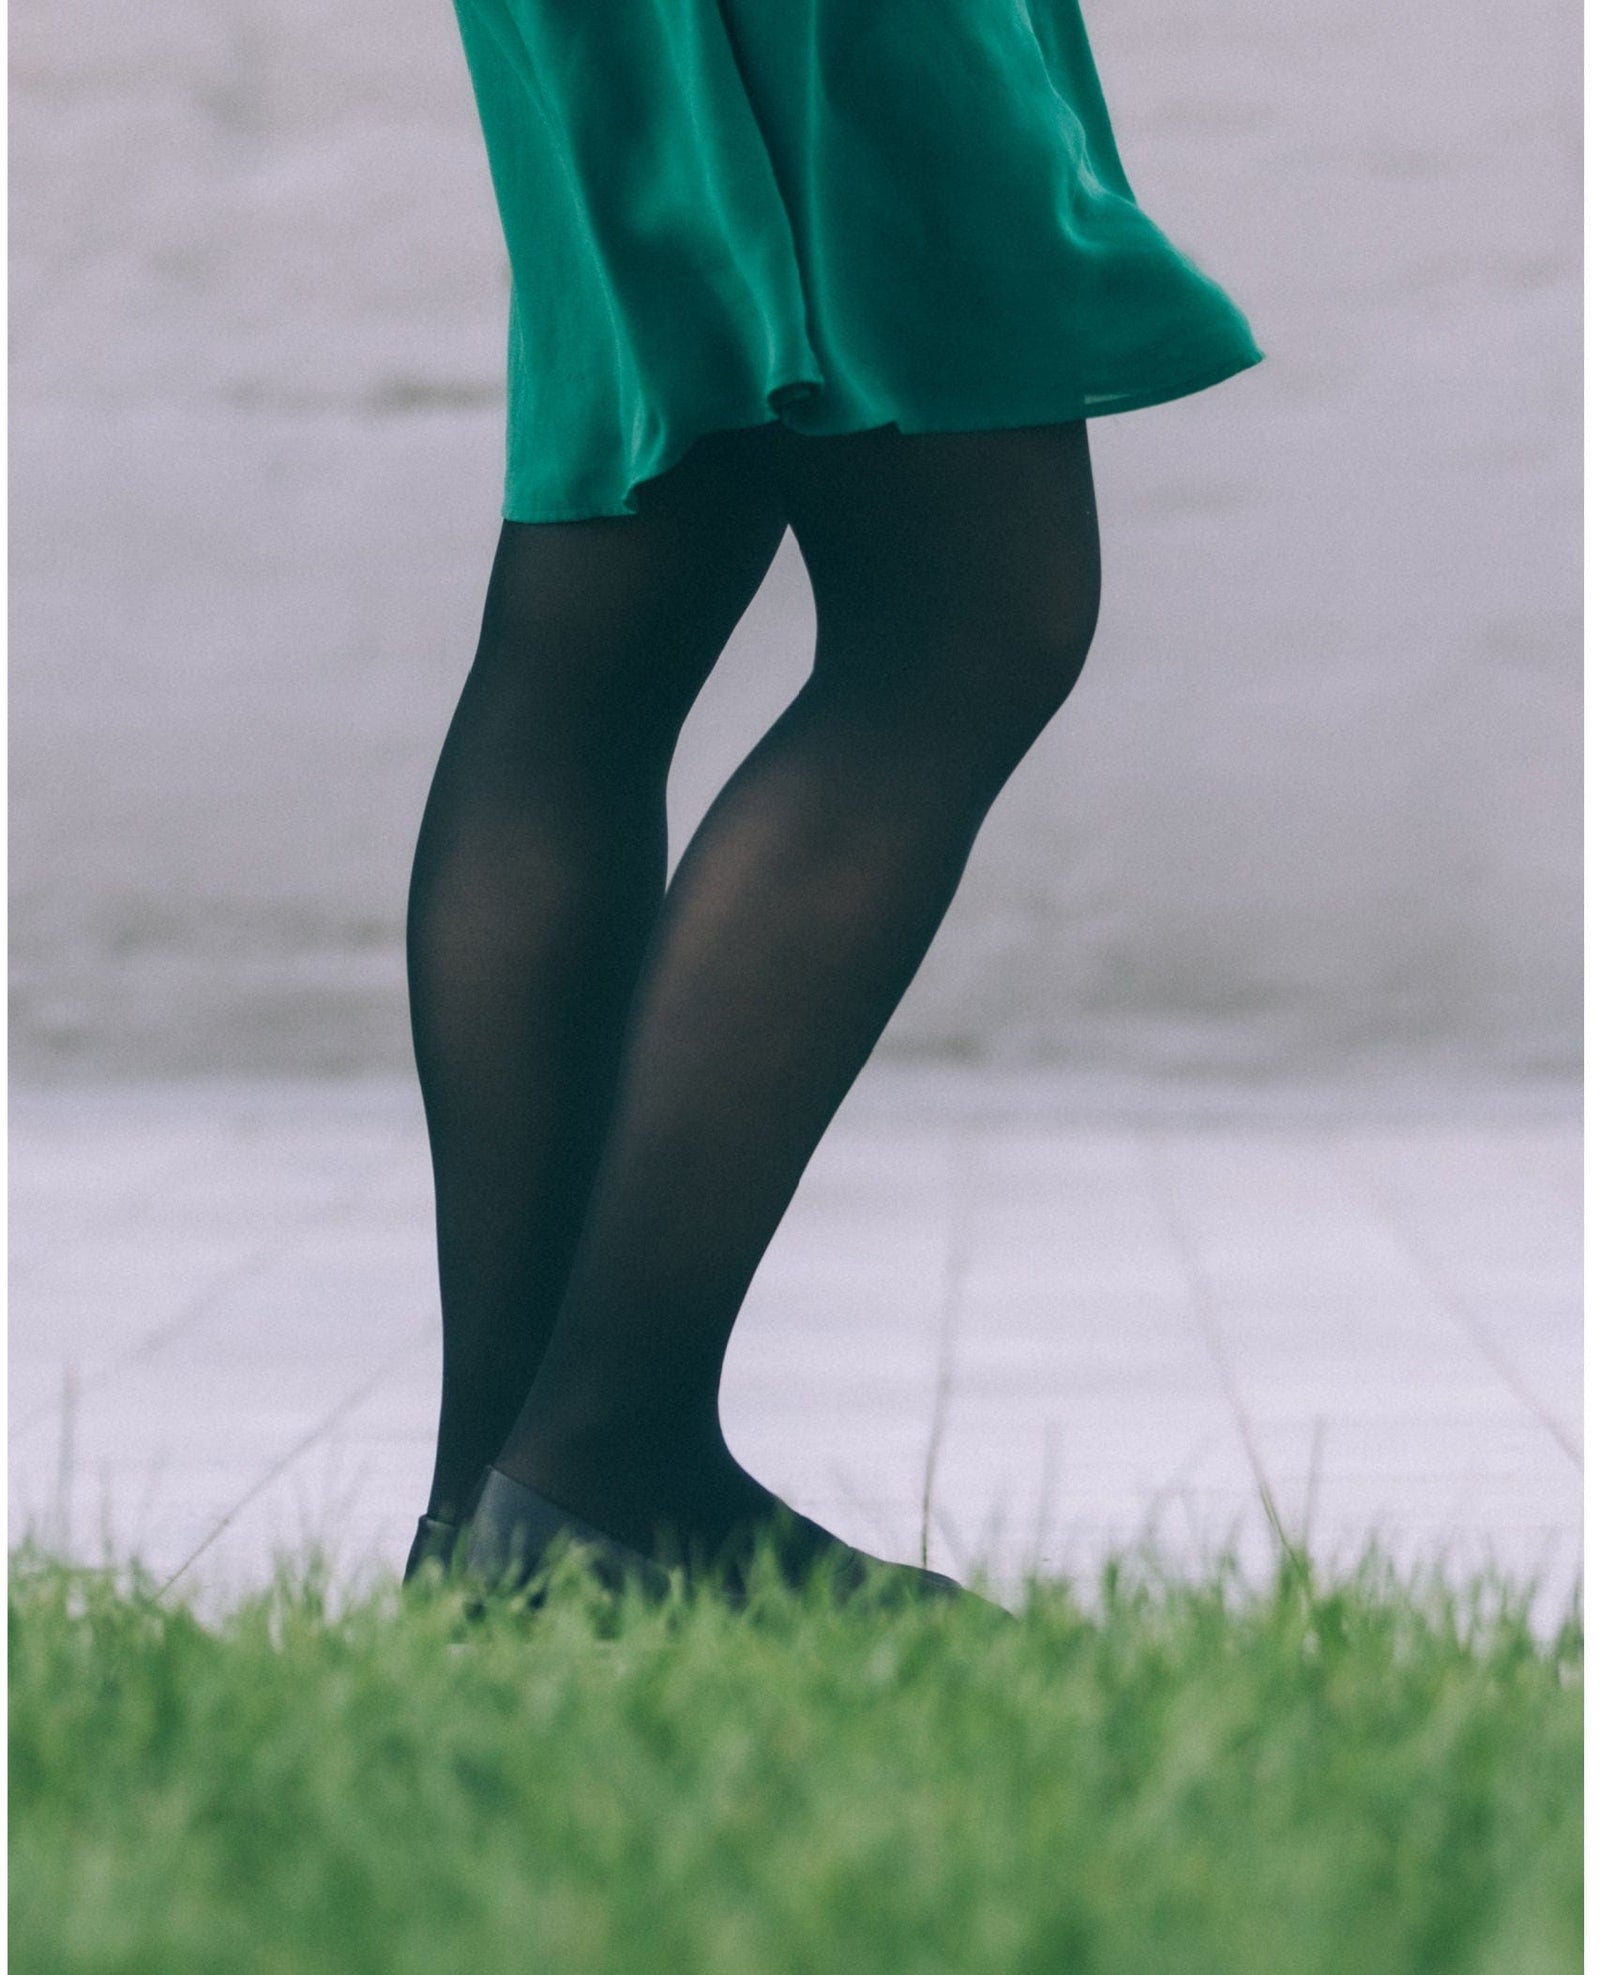  Green - Black Ombre Tights Quality Opaque Gradient Pantyhose :  Handmade Products